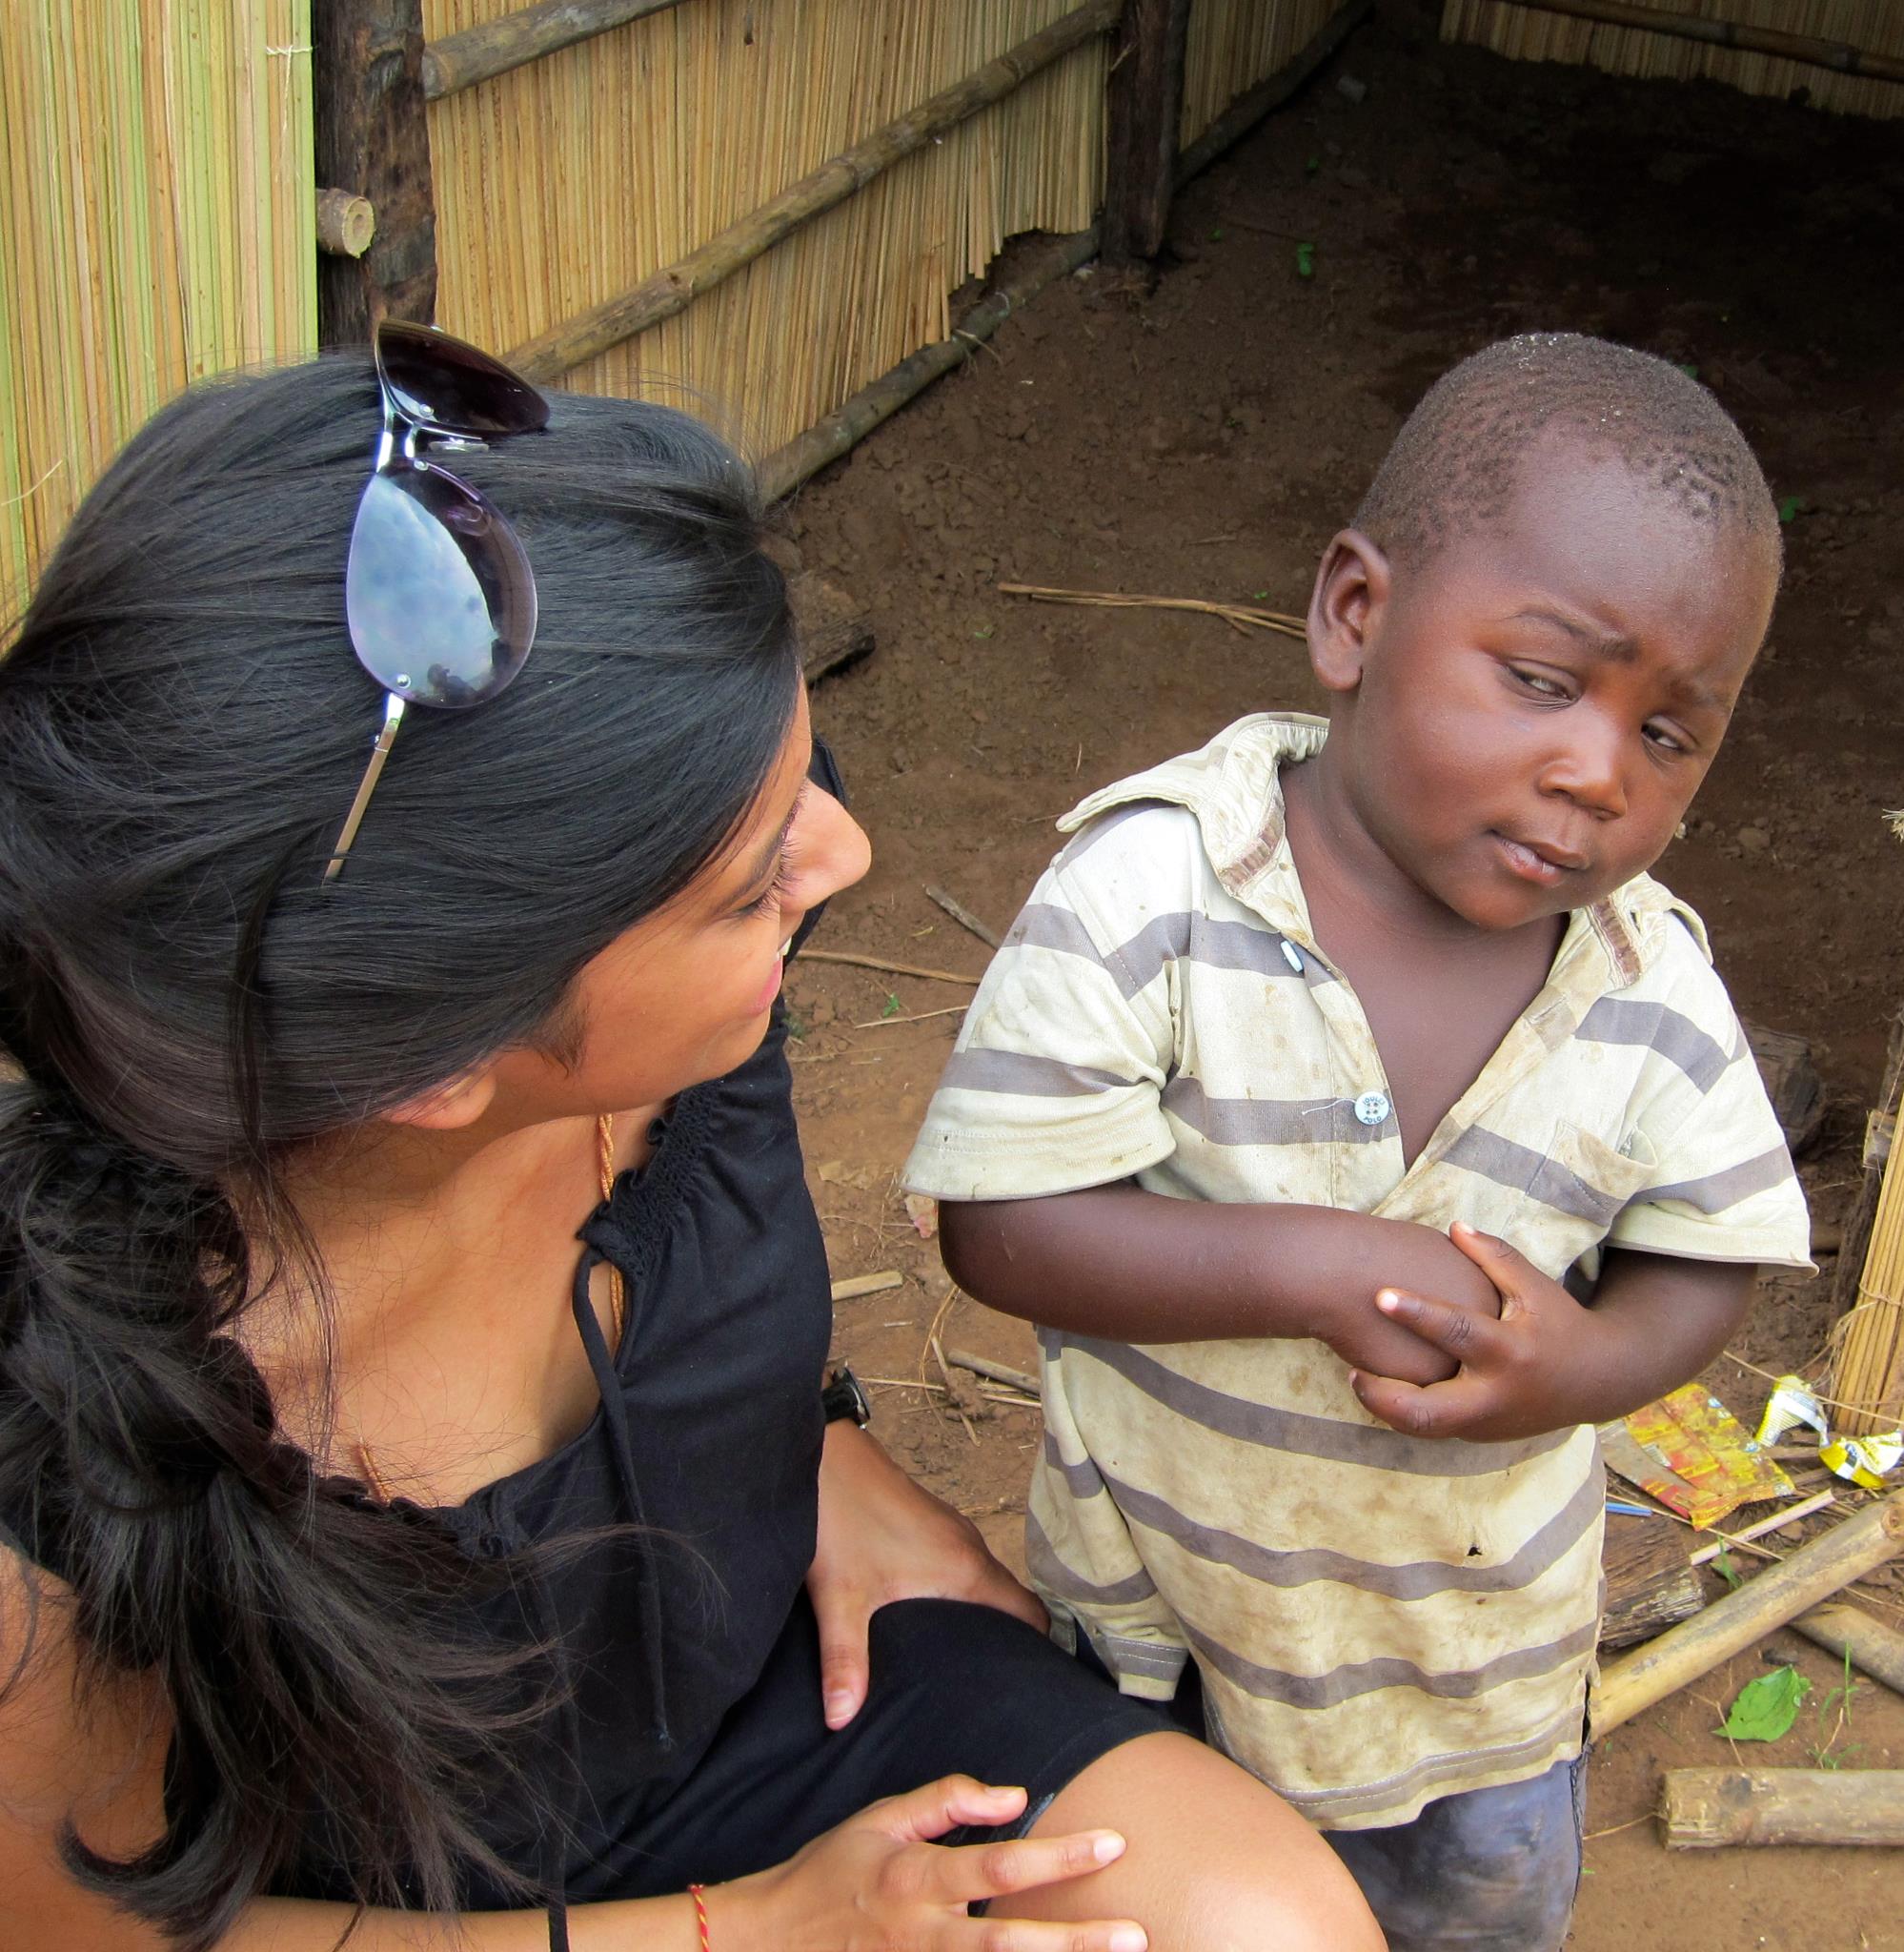 a young African boy looks very sceptically at what looks like an aid worker. The image has appeared countless times in social media and is known as Sceptical Third World Child